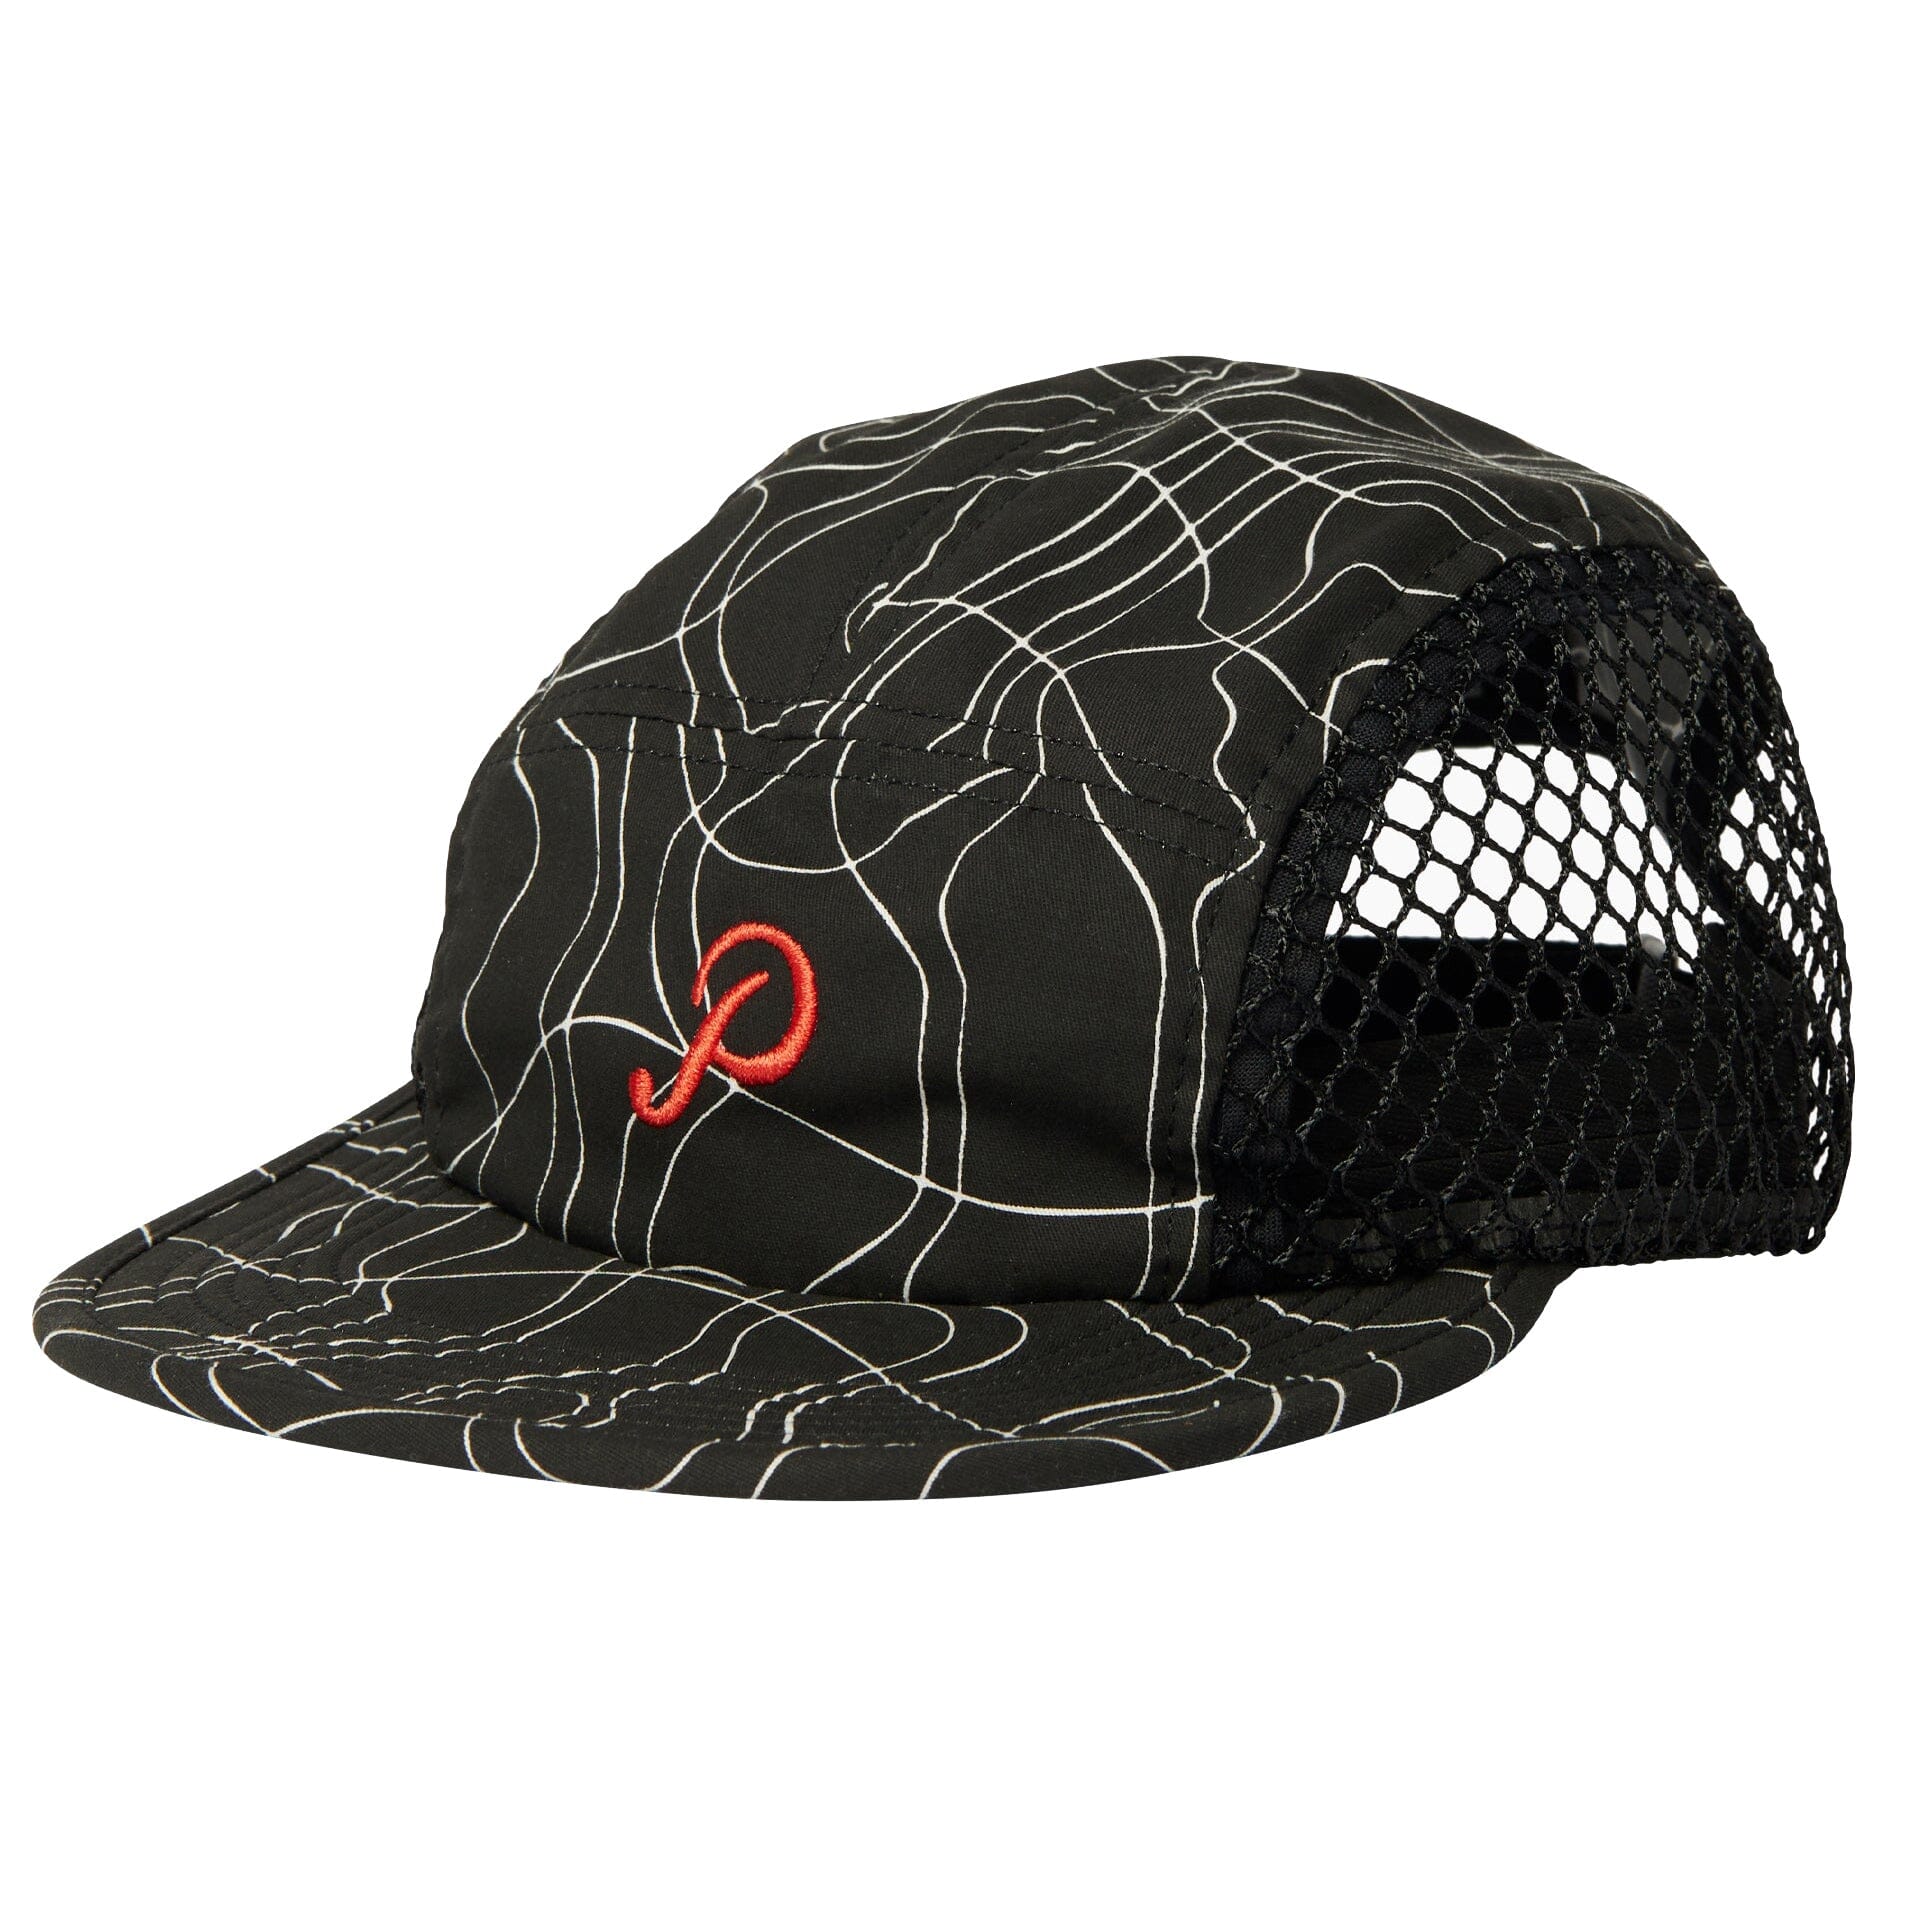 Parra Trees in the Wind Mesh Volley Hat Black hats by Parra 